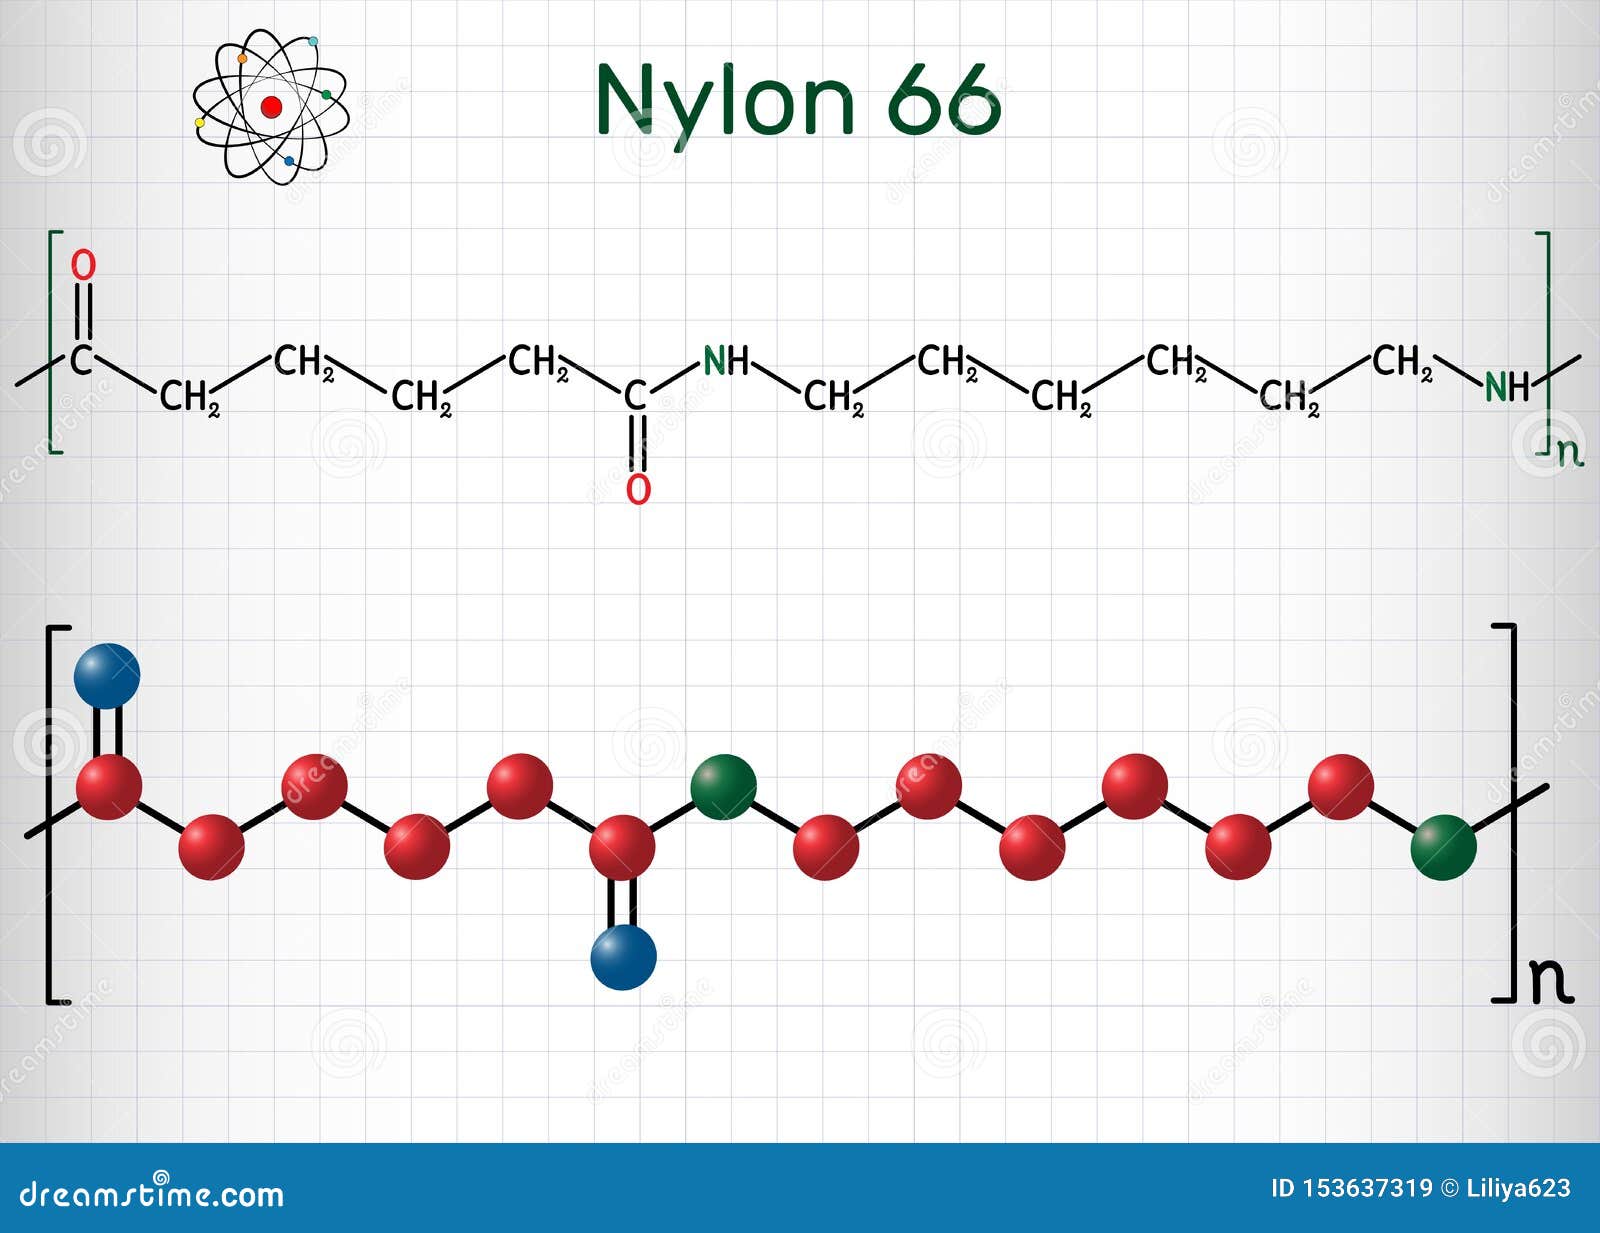 Nylon 66 or Nylon Molecule. it is Plastic Polymer. Structural